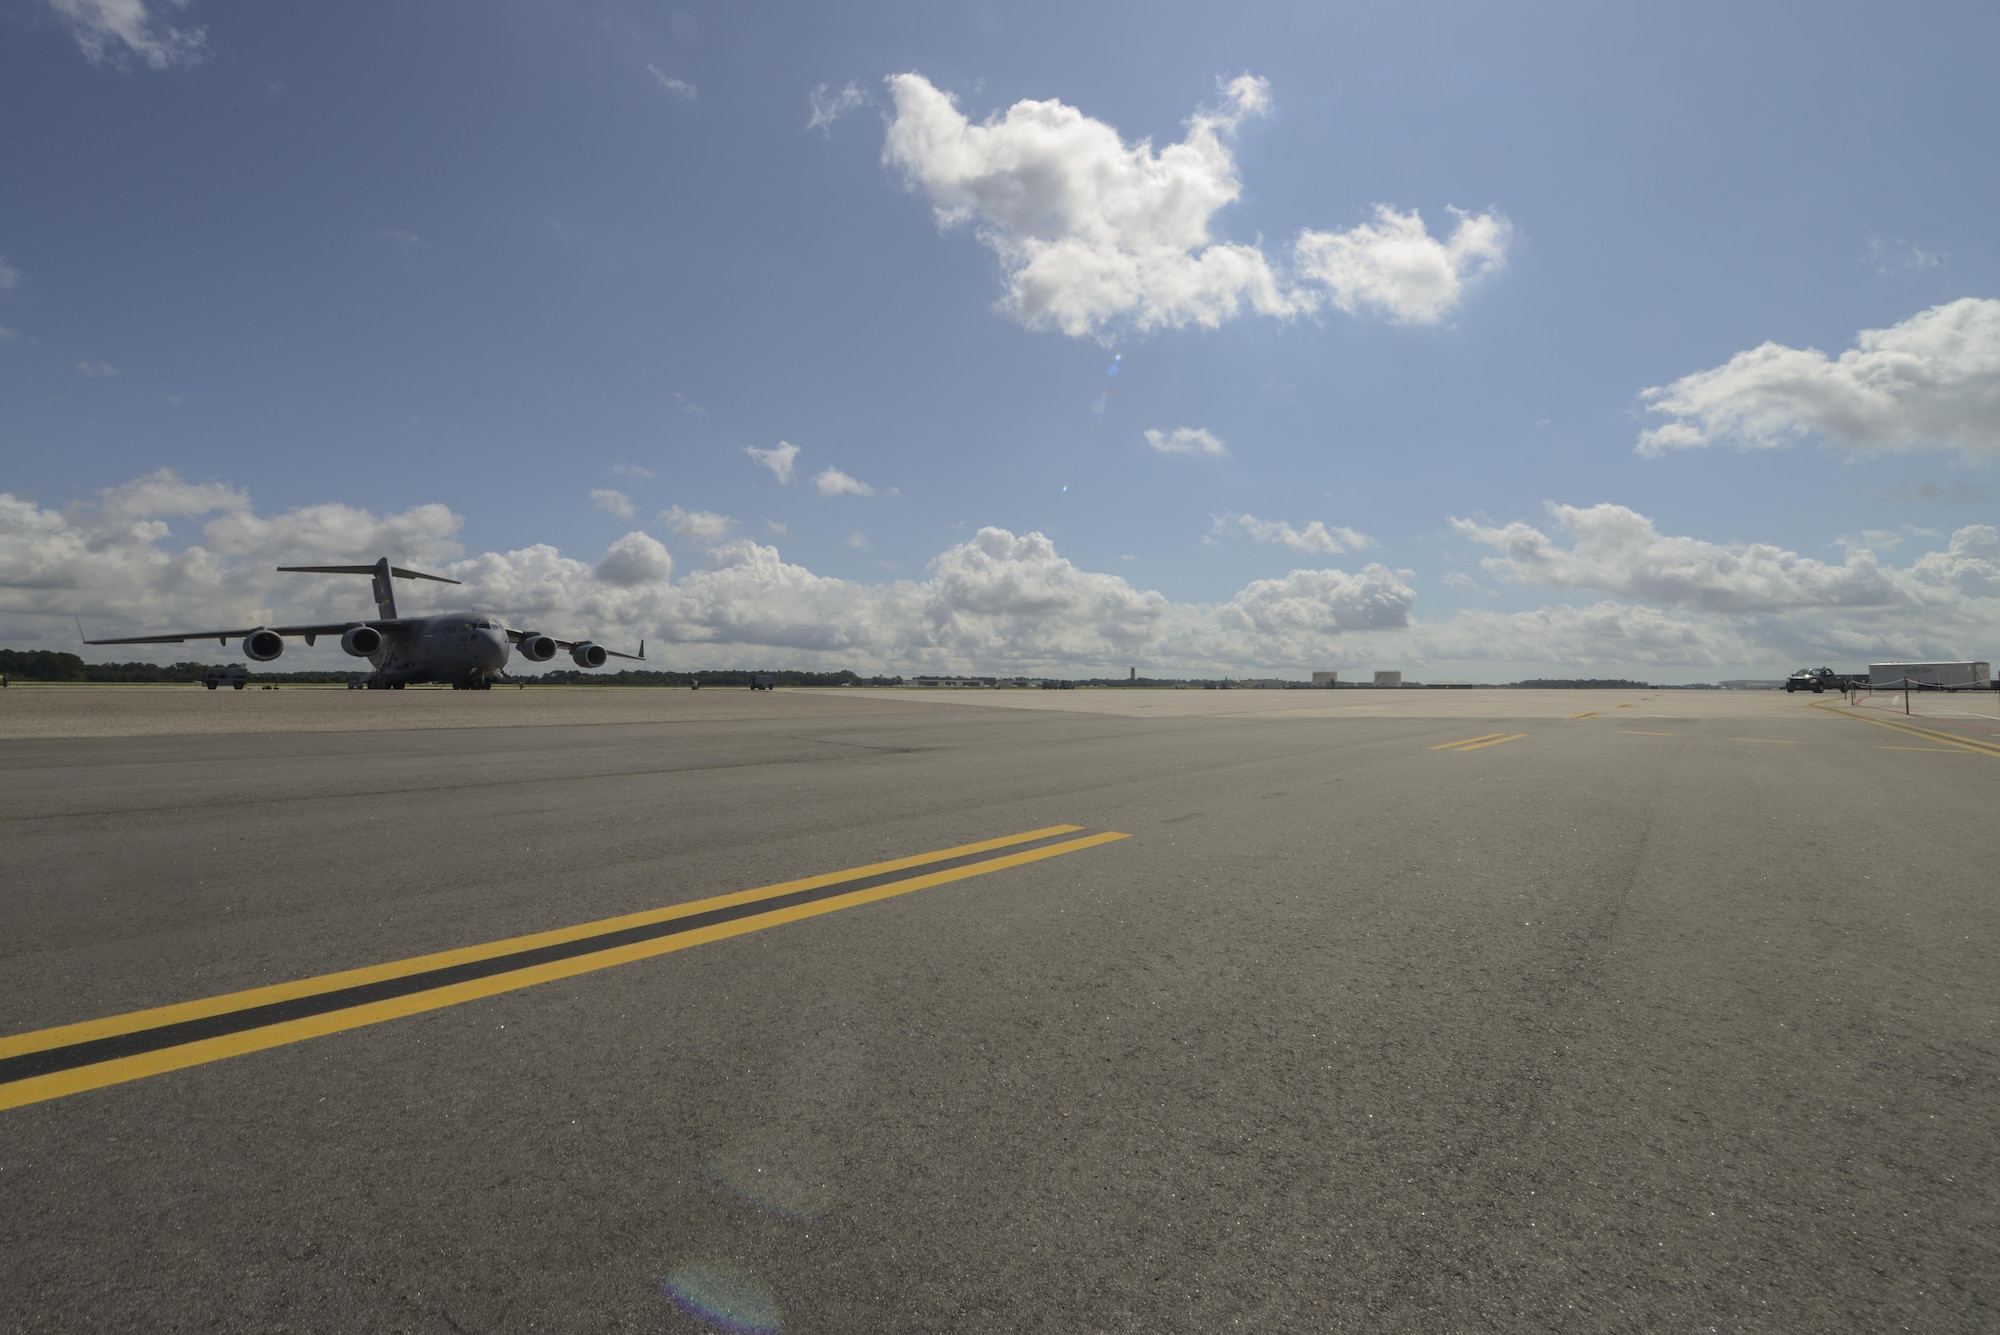 The first C-17 Globemaster III aircrew returns to the JB Charleston, S.C. flightline on Sept. 13 after the Hurricane Irma evacuation order was rescinded.